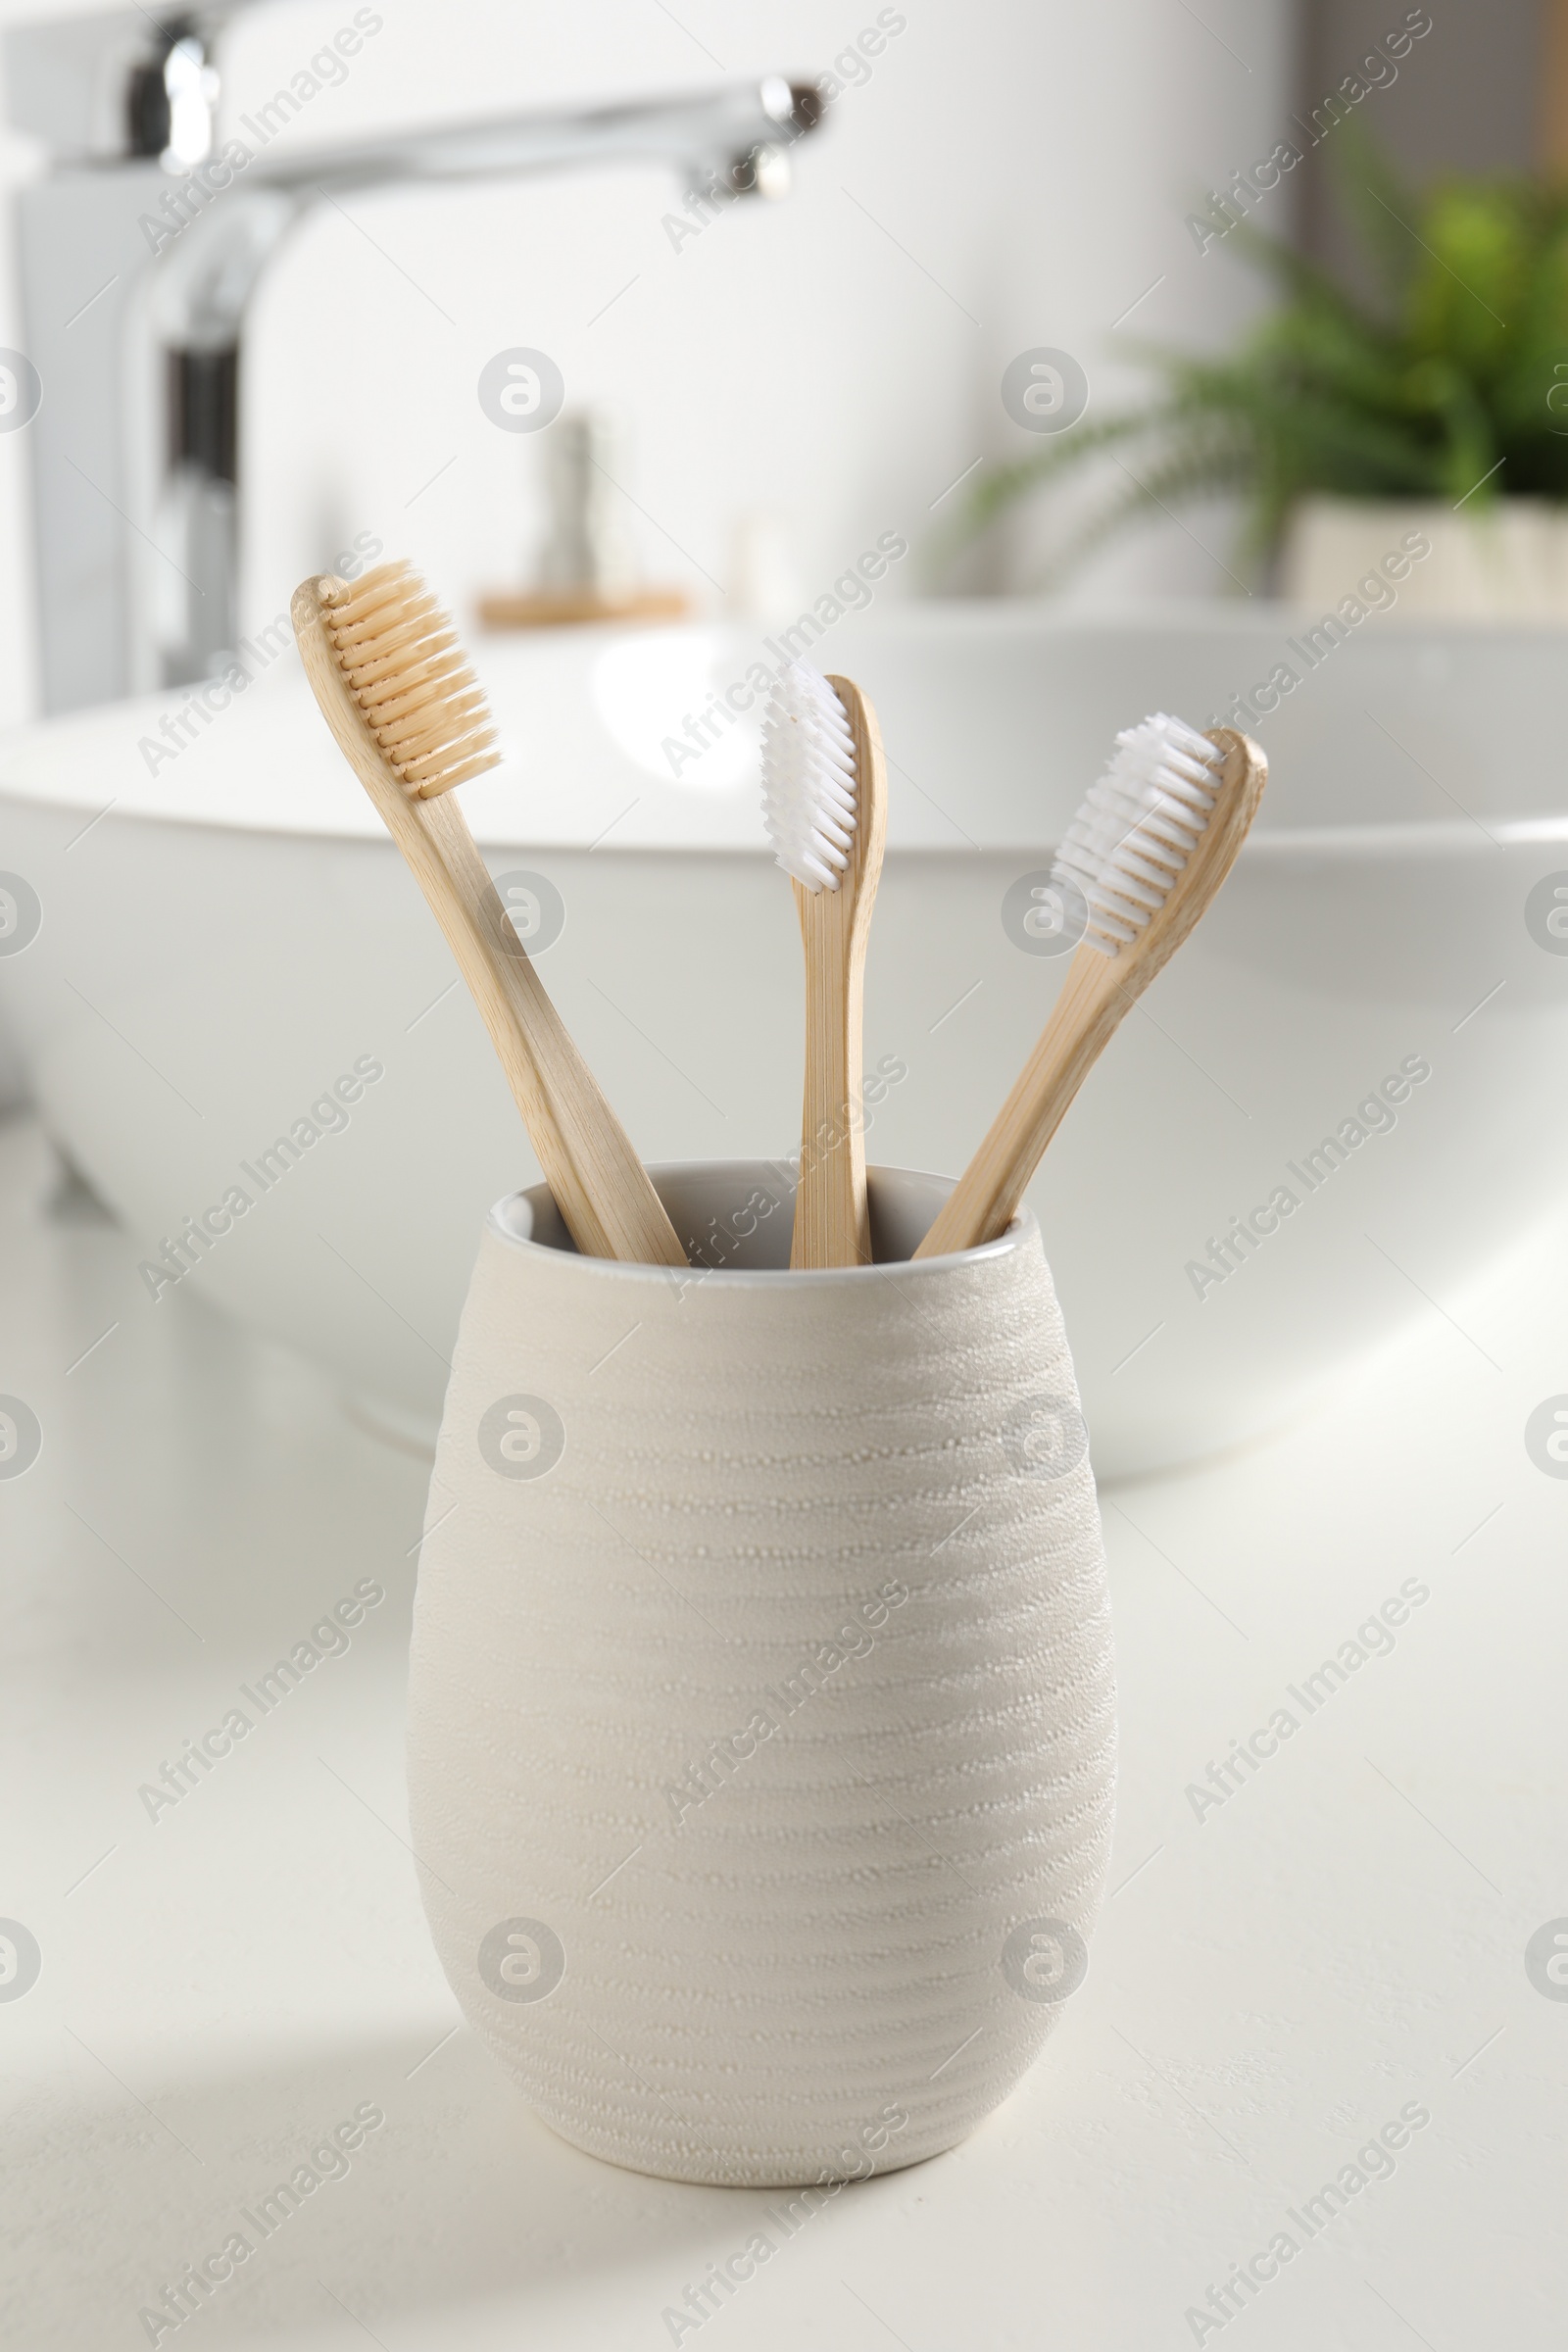 Photo of Bamboo toothbrushes on white countertop in bathroom